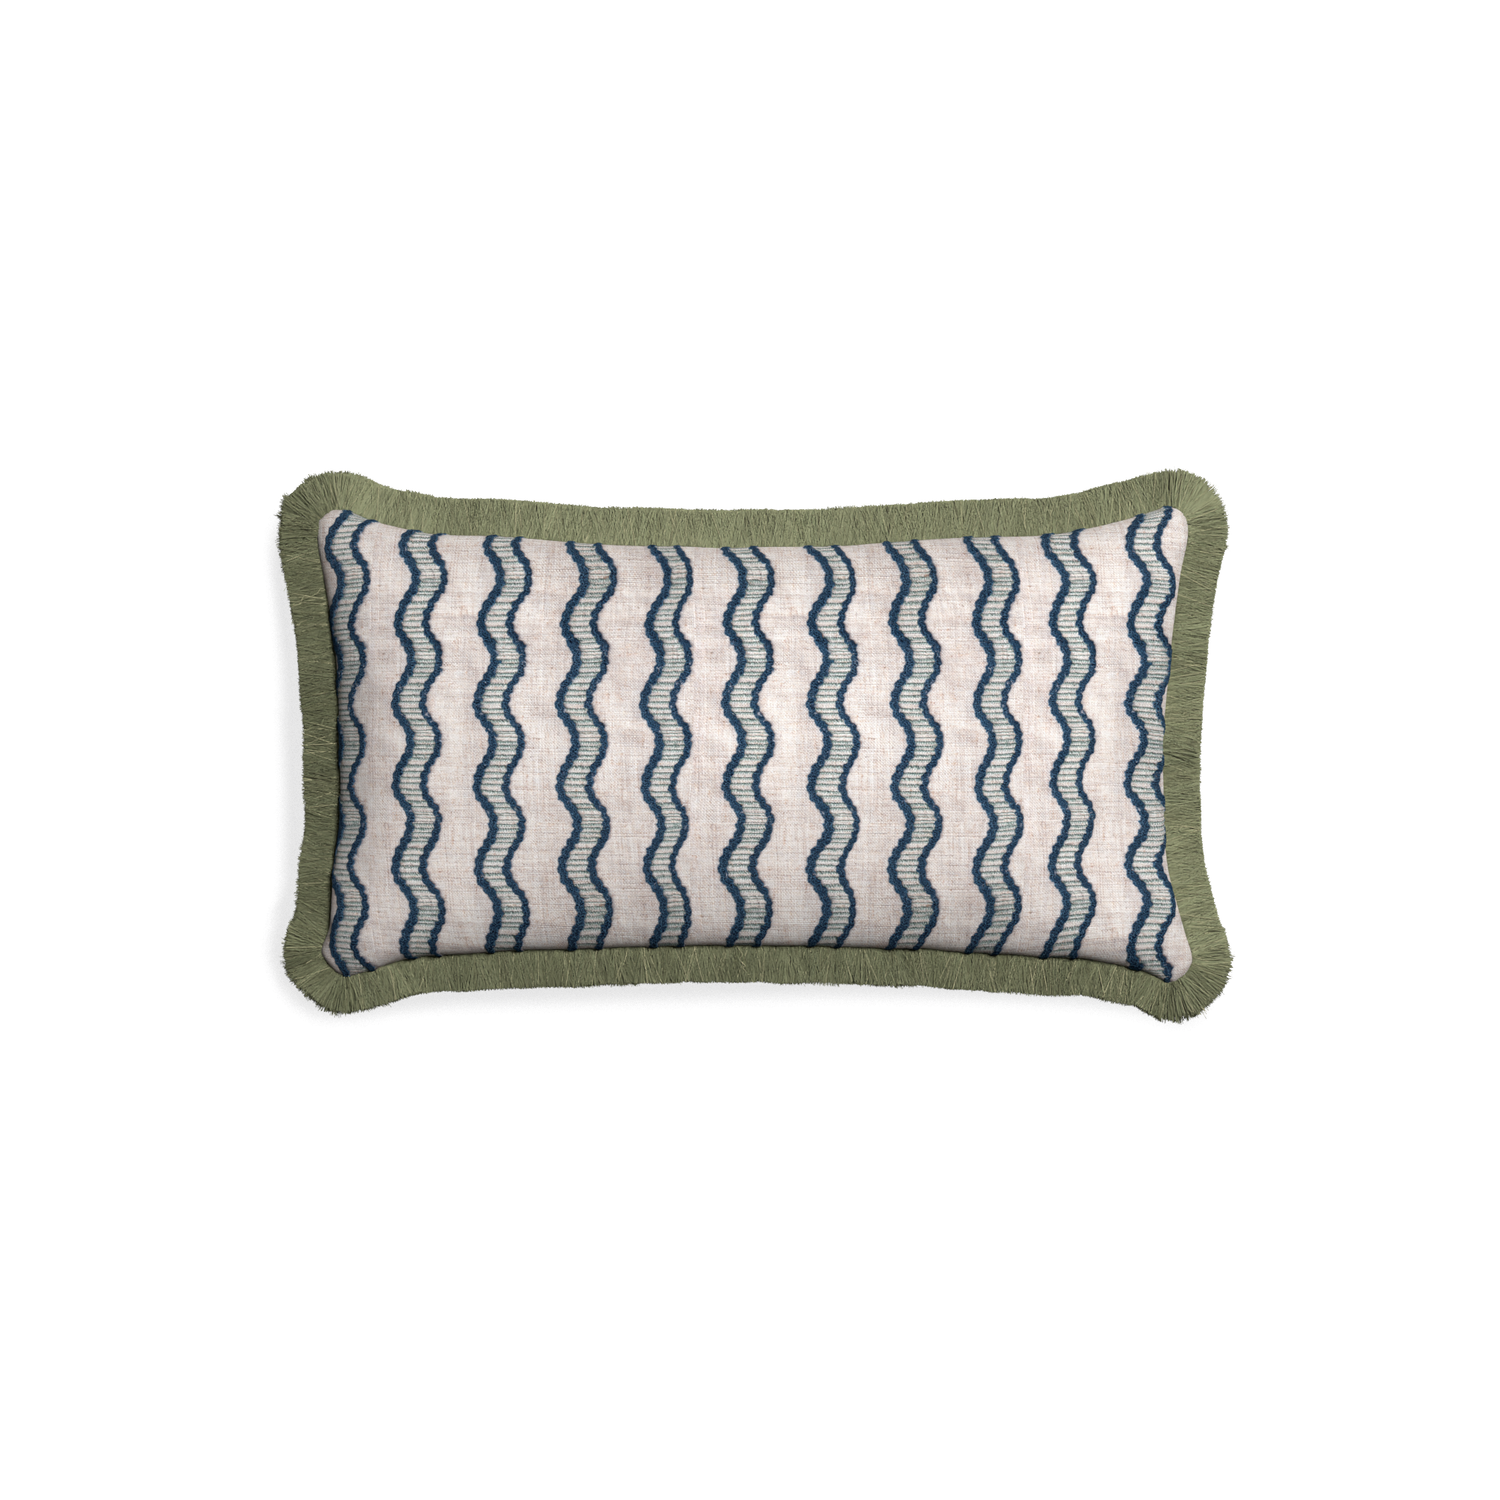 Petite-lumbar beatrice custom embroidered wavepillow with sage fringe on white background